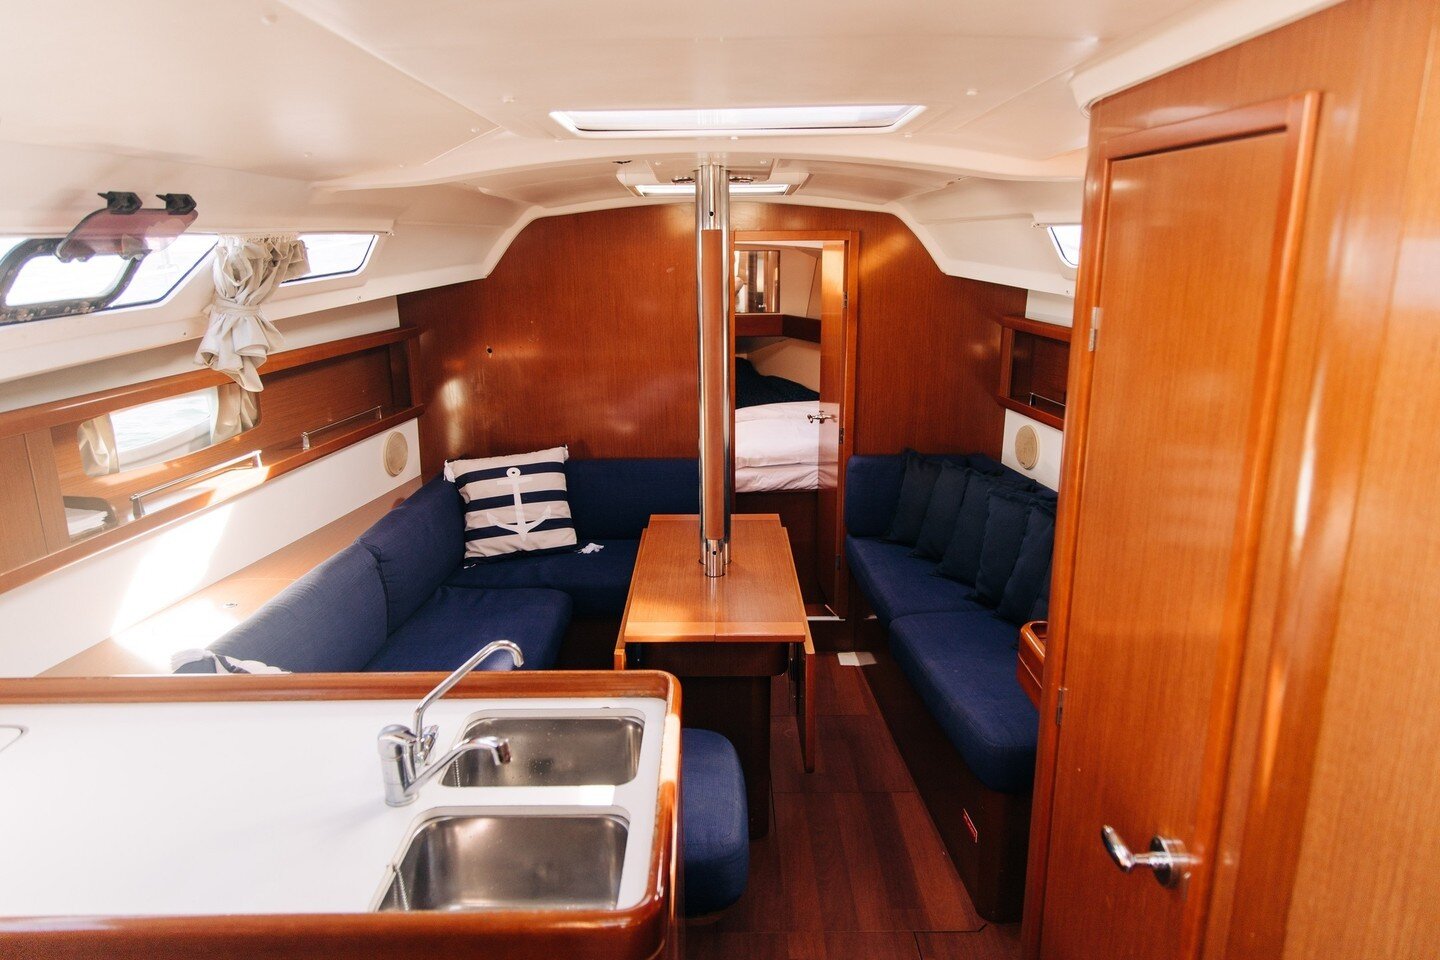 Having fully self-contained yachts equipped with amenities such as cotton linen, towels, a galley kitchen, and a bathroom onboard certainly enhances the experience of an Overnight Yacht Stay. It allows for a comfortable and convenient stay, ensuring 